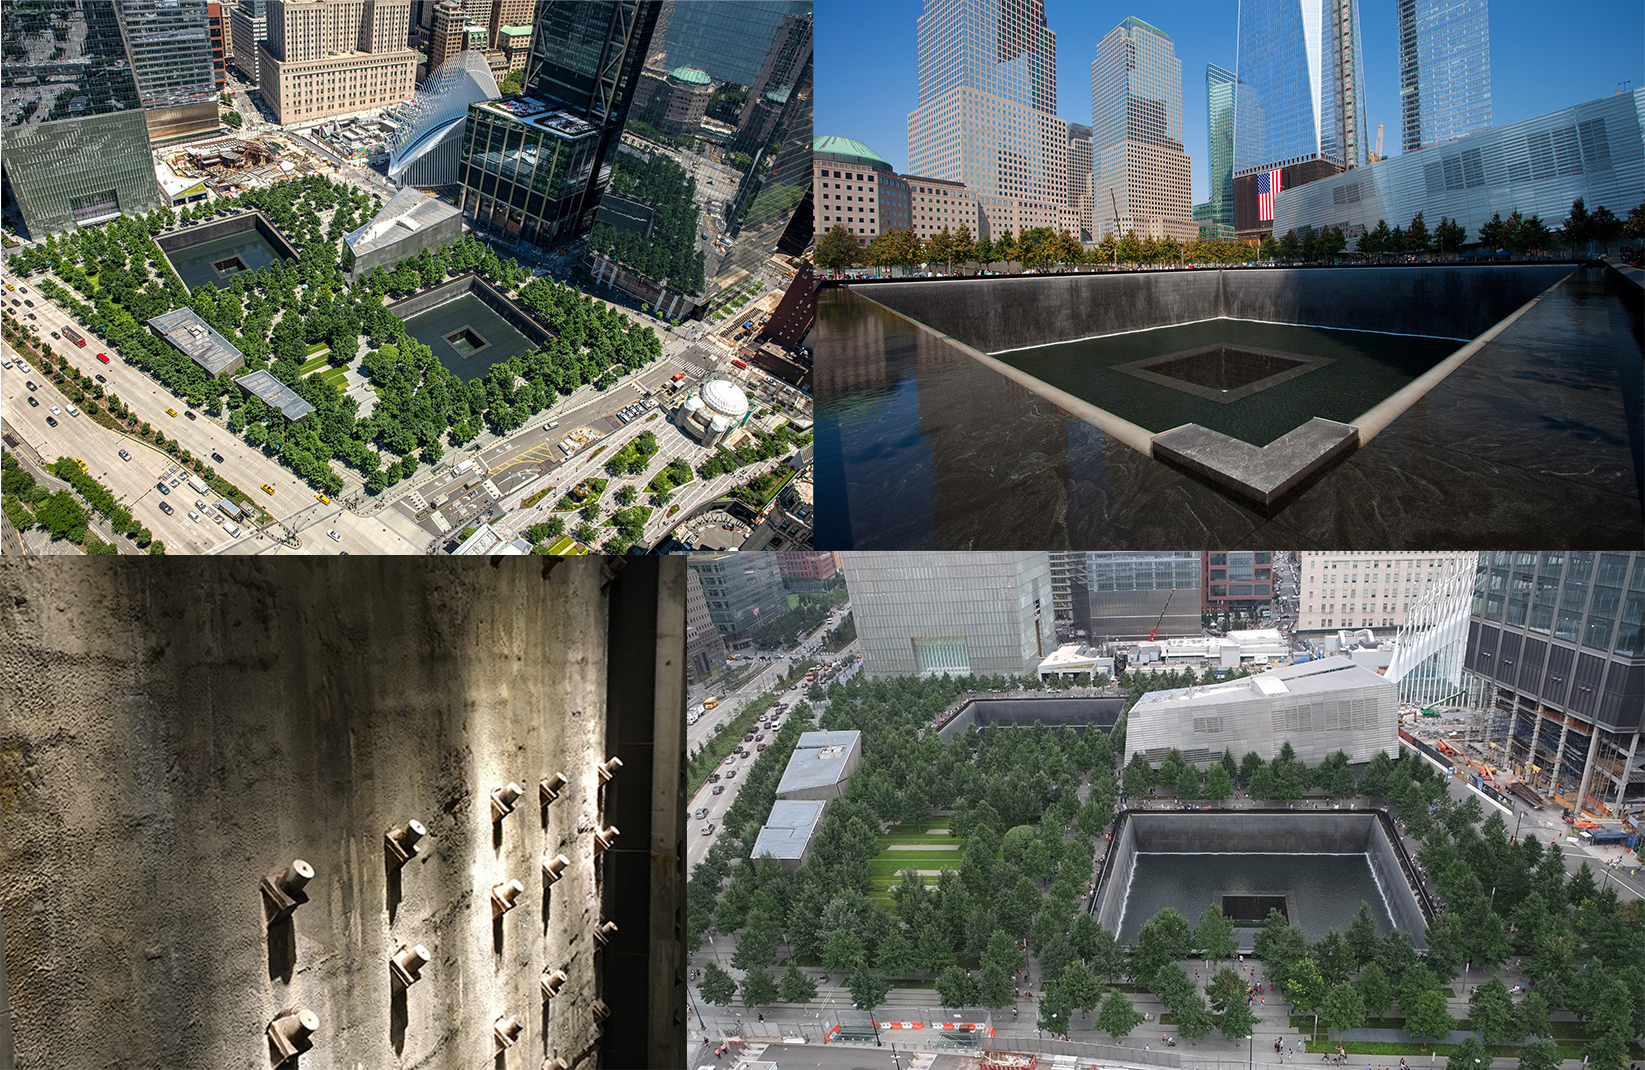 pictures of buildings and landscapes that are memorial sites for the Sept. 11 terrorist attacks